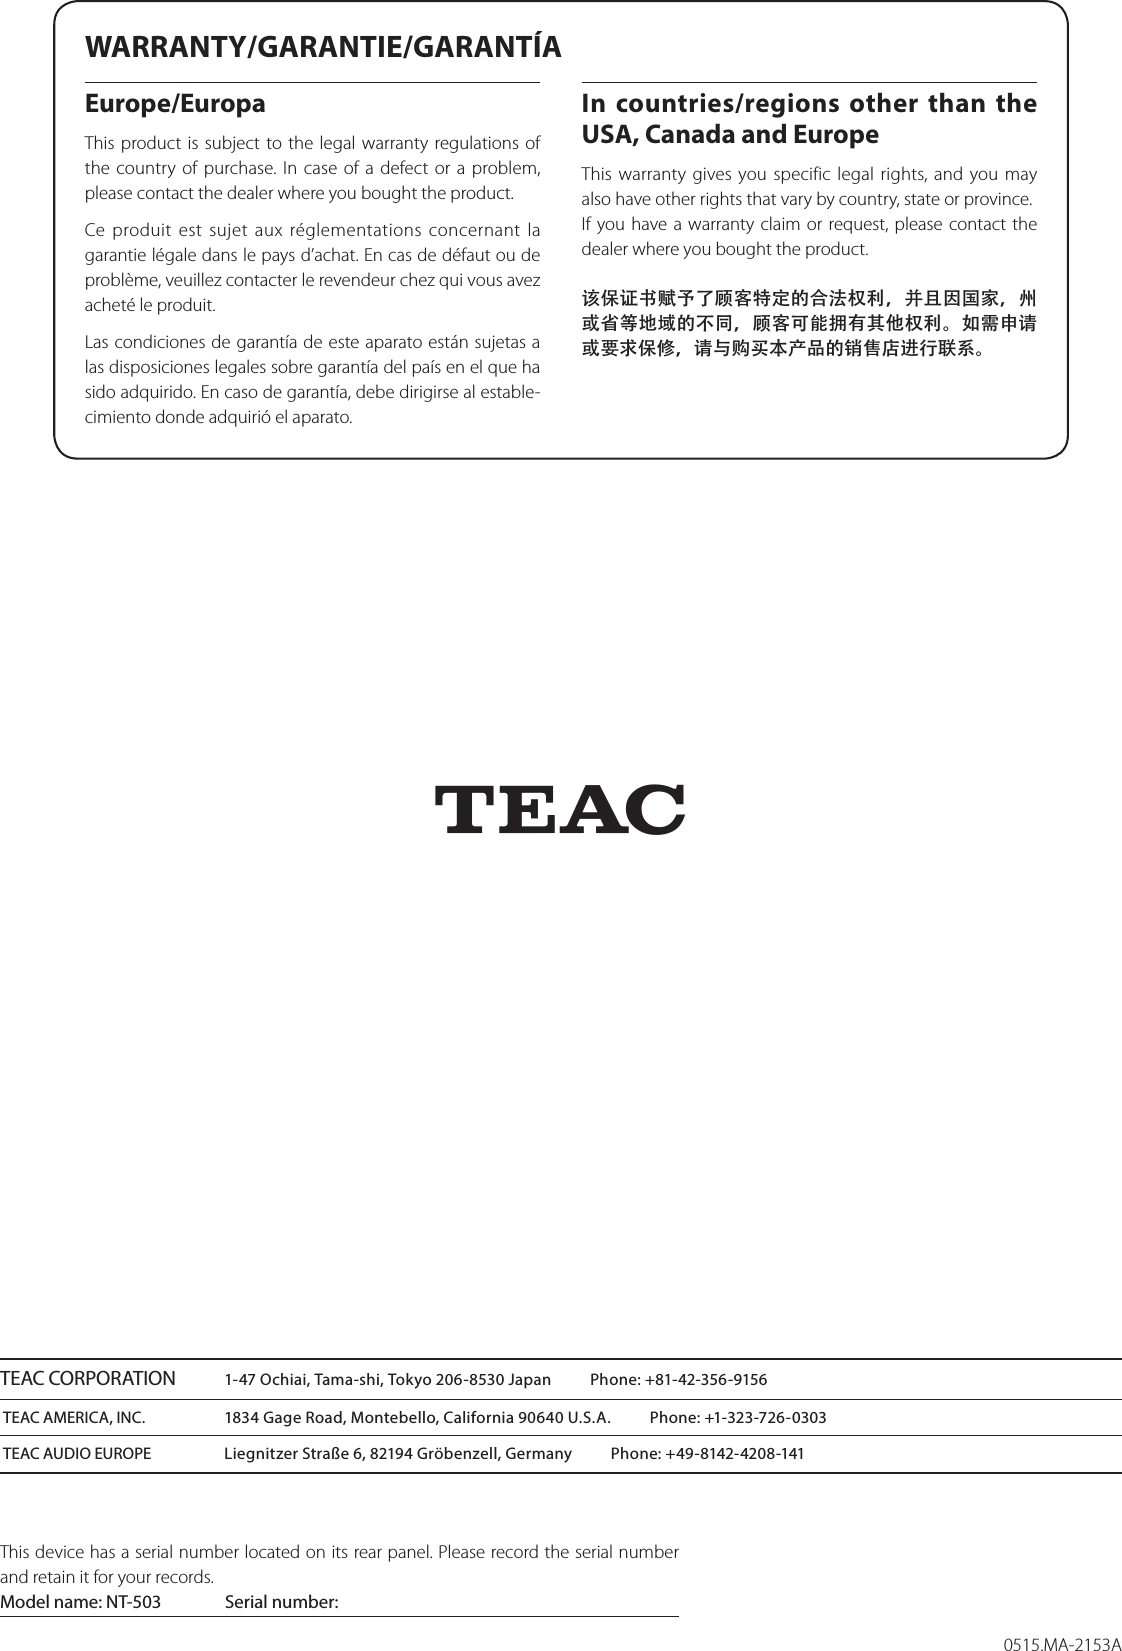 0515.MA-2153ATEAC CORPORATION  1-47 Ochiai, Tama-shi, Tokyo 206-8530 Japan          Phone: +81-42-356-9156TEAC AMERICA, INC.  1834 Gage Road, Montebello, California 90640 U.S.A.          Phone: +1-323-726-0303TEAC AUDIO EUROPE  Liegnitzer Straße 6, 82194 Gröbenzell, Germany          Phone: +49-8142-4208-141This device has a serial number located on its rear panel. Please record the serial number and retain it for your records.Model name: NT-503  Serial number:         ZWARRANTY/GARANTIE/GARANTÍAEurope/EuropaThis product is subject to the legal warranty regulations of the country of purchase. In case of a defect or a problem, please contact the dealer where you bought the product.Ce produit est sujet aux réglementations concernant la garantie légale dans le pays d’achat. En cas de défaut ou de problème, veuillez contacter le revendeur chez qui vous avez acheté le produit. Las condiciones de garantía de este aparato están sujetas a las disposiciones legales sobre garantía del país en el que ha sido adquirido. En caso de garantía, debe dirigirse al estable-cimiento donde adquirió el aparato.In countries/regions other than the USA, Canada and EuropeThis warranty gives you specific legal rights, and you may also have other rights that vary by country, state or province.If you have a warranty claim or request, please contact the dealer where you bought the product.该保证书赋予了顾客特定的合法权利，并且因国家，州或省等地域的不同，顾客可能拥有其他权利。如需申请或要求保修，请与购买本产品的销售店进行联系。